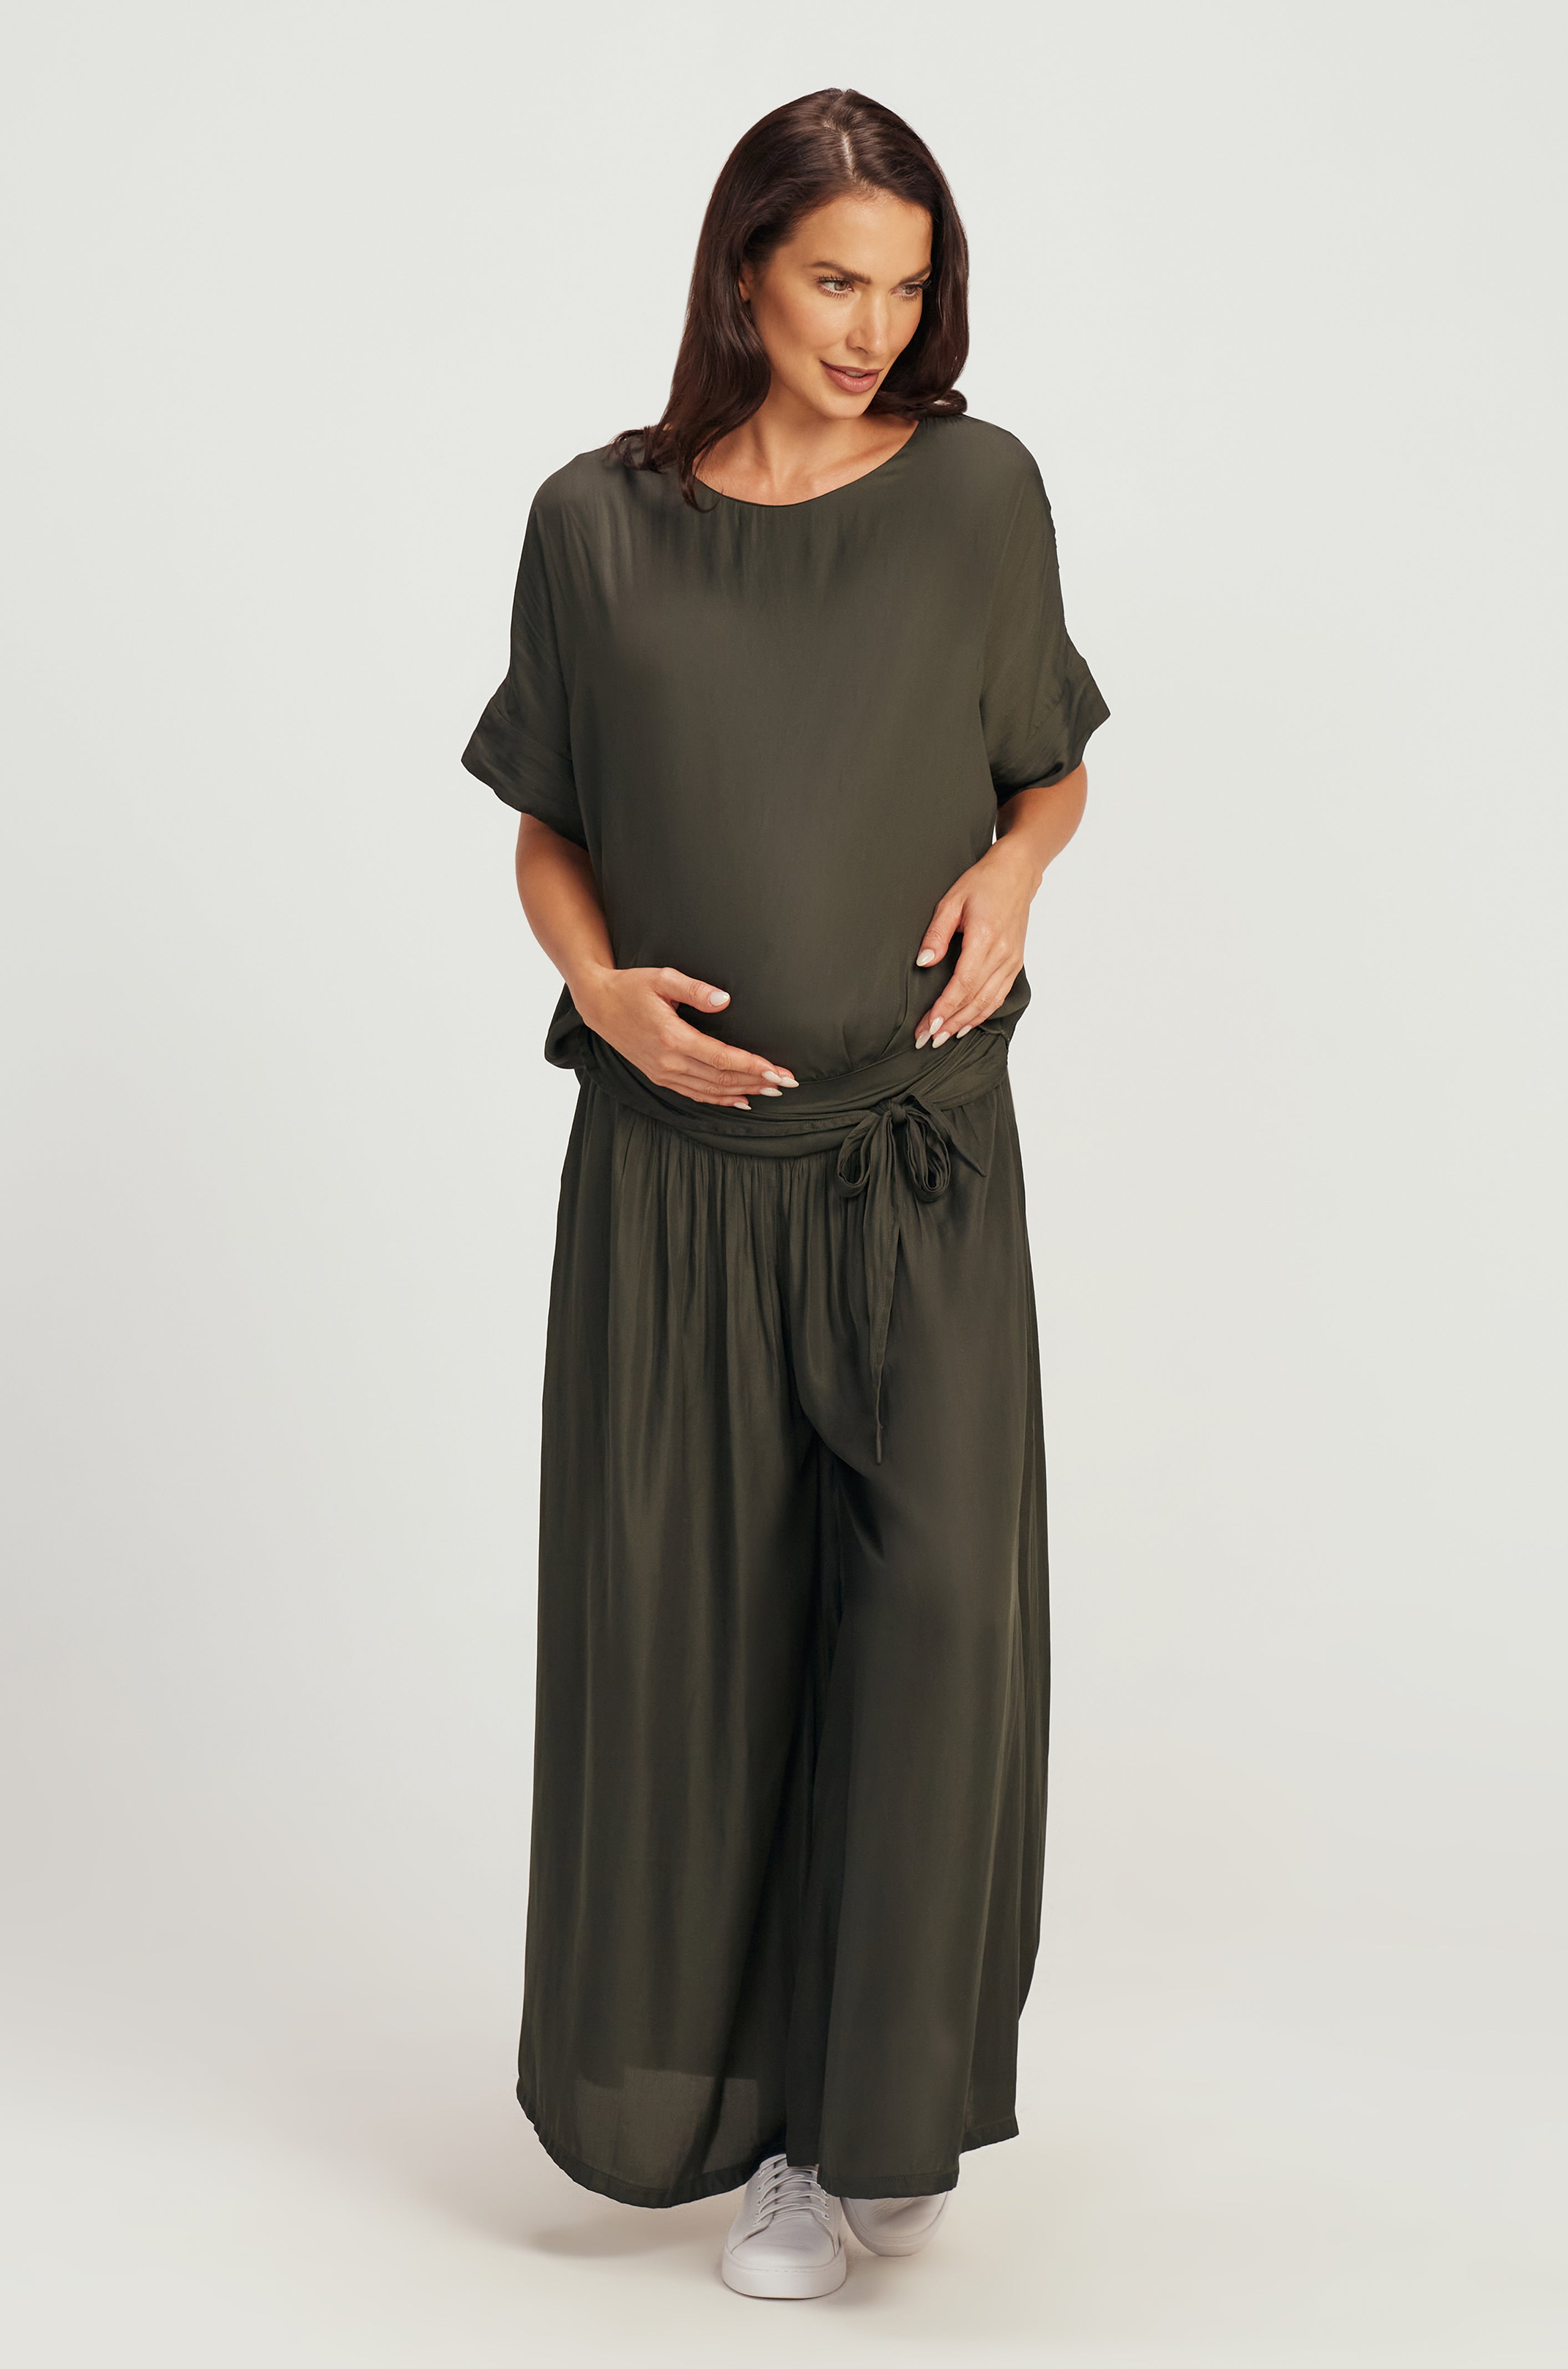 THE STAPLE TOP/ SAGE GREEN / MATERNITY